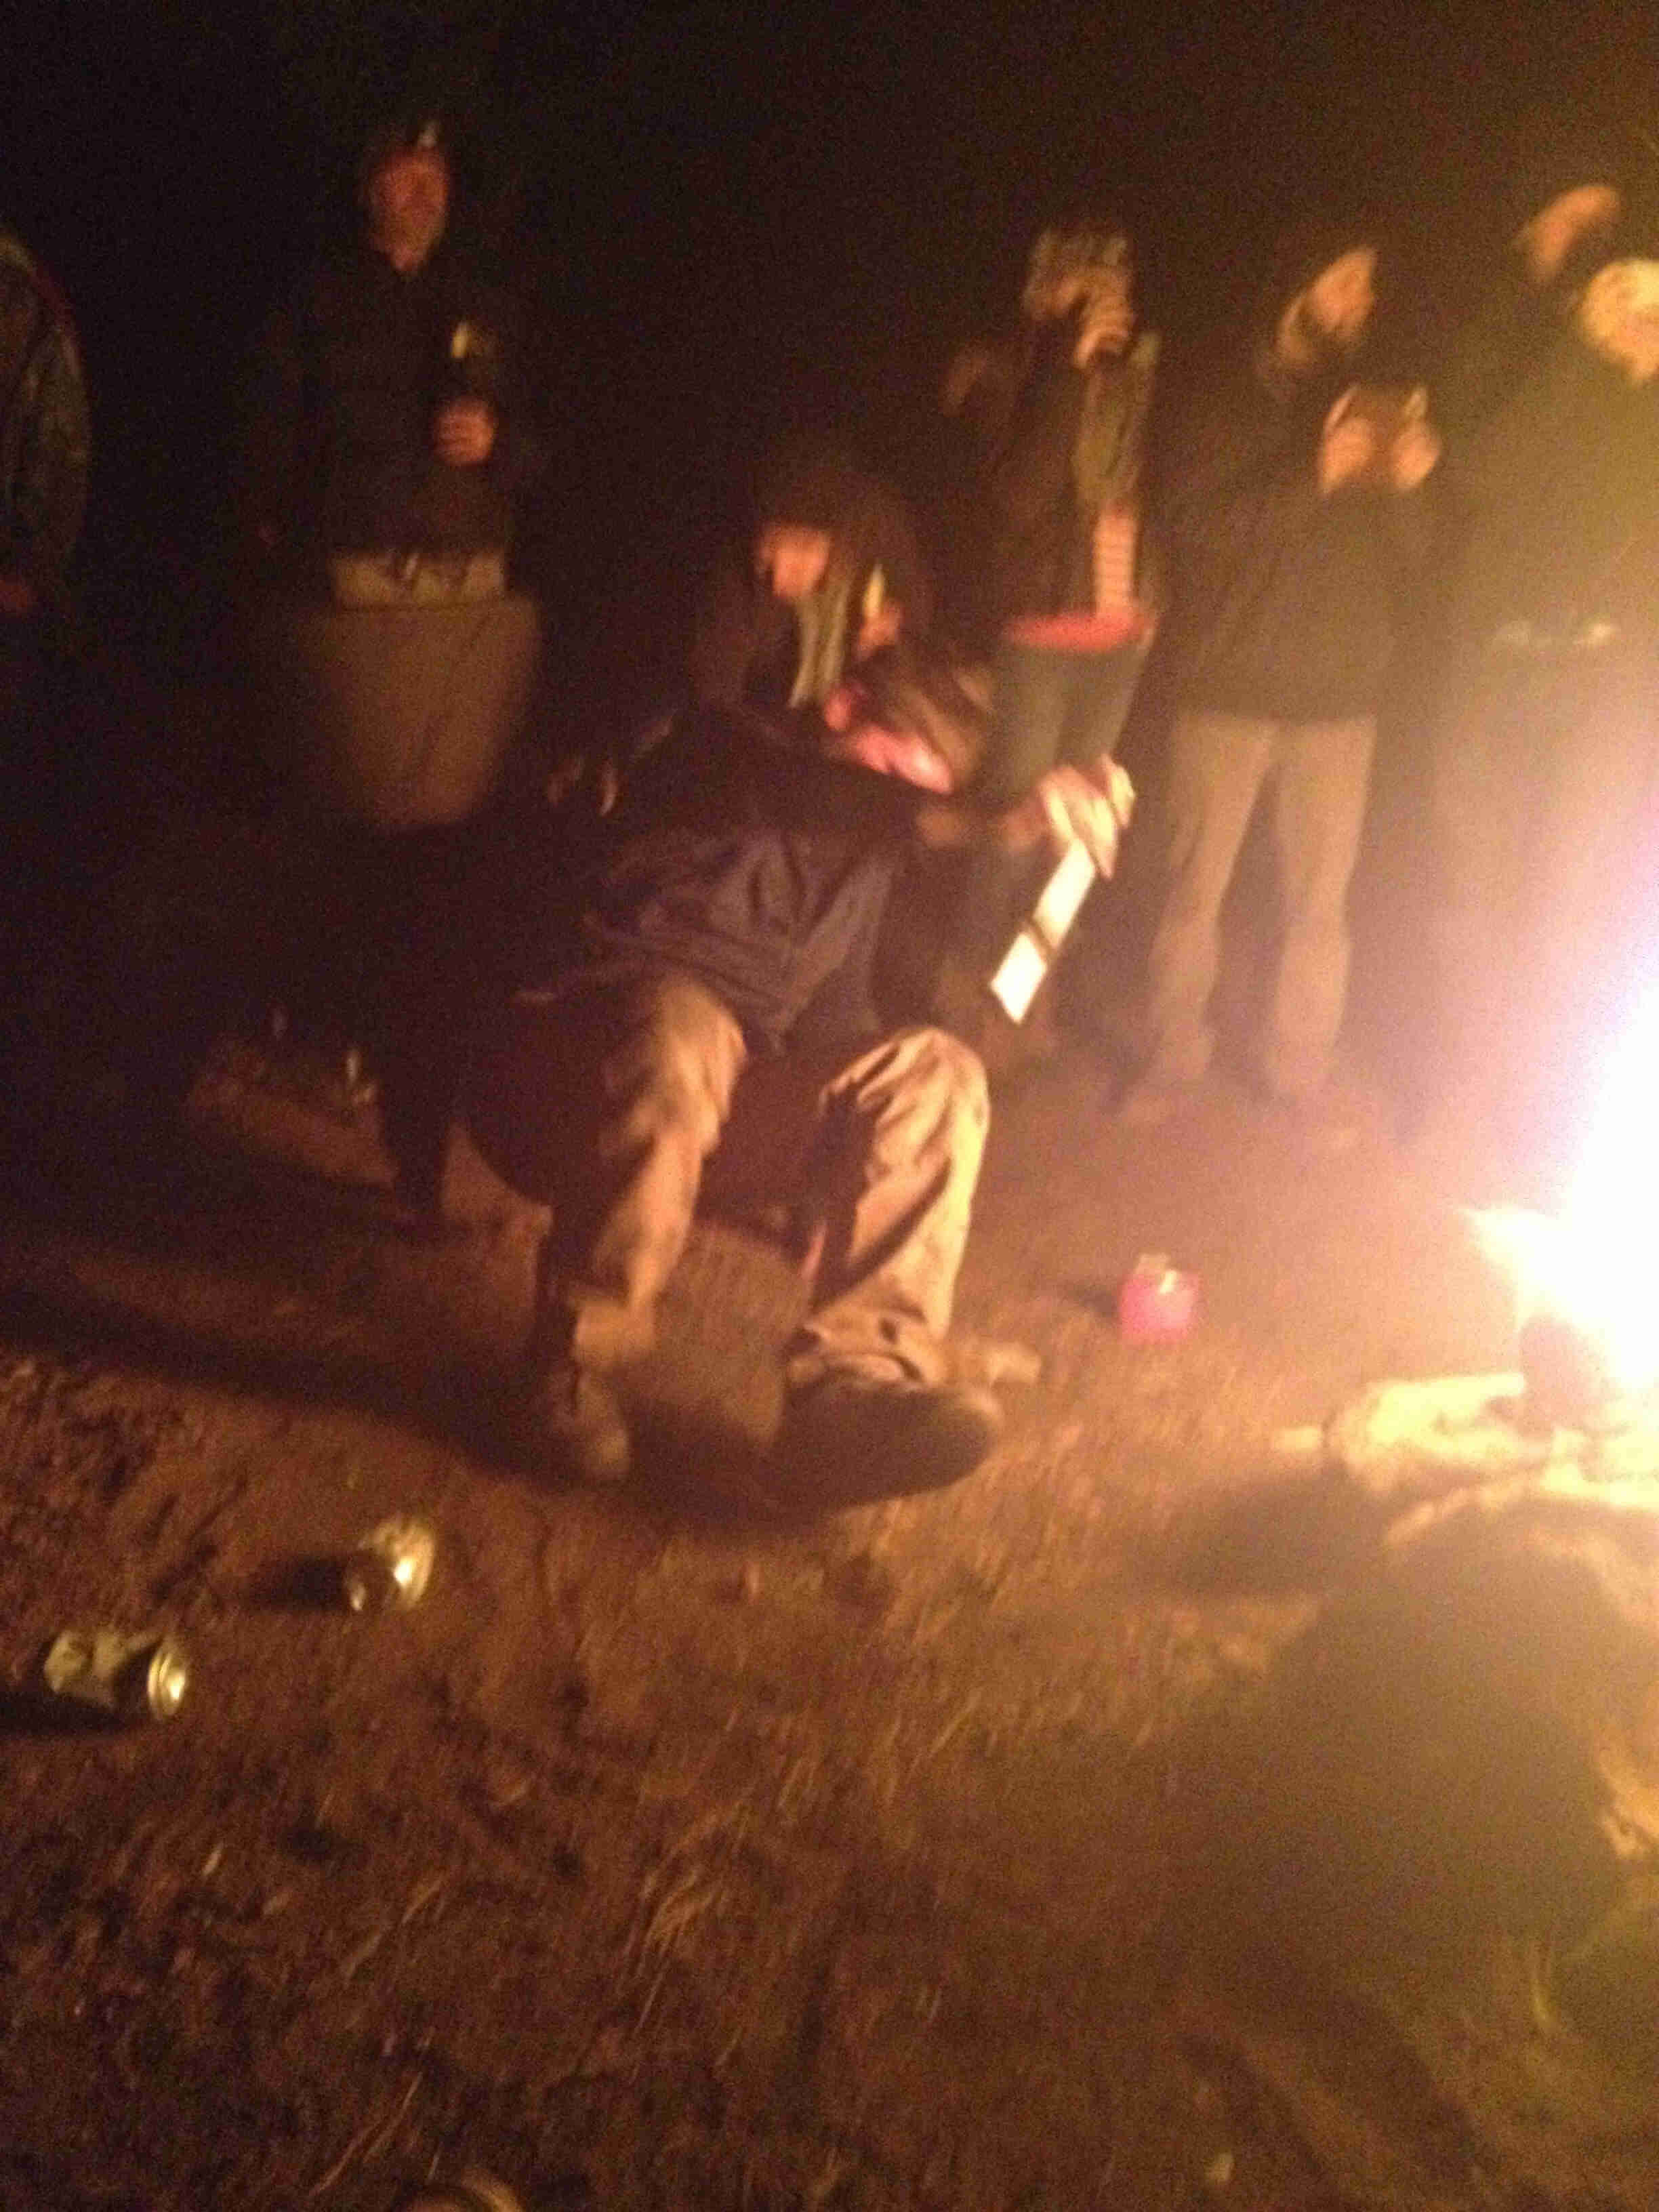 Front view of a person on the ground break dancing, next to campfire at night, with people standing behind them